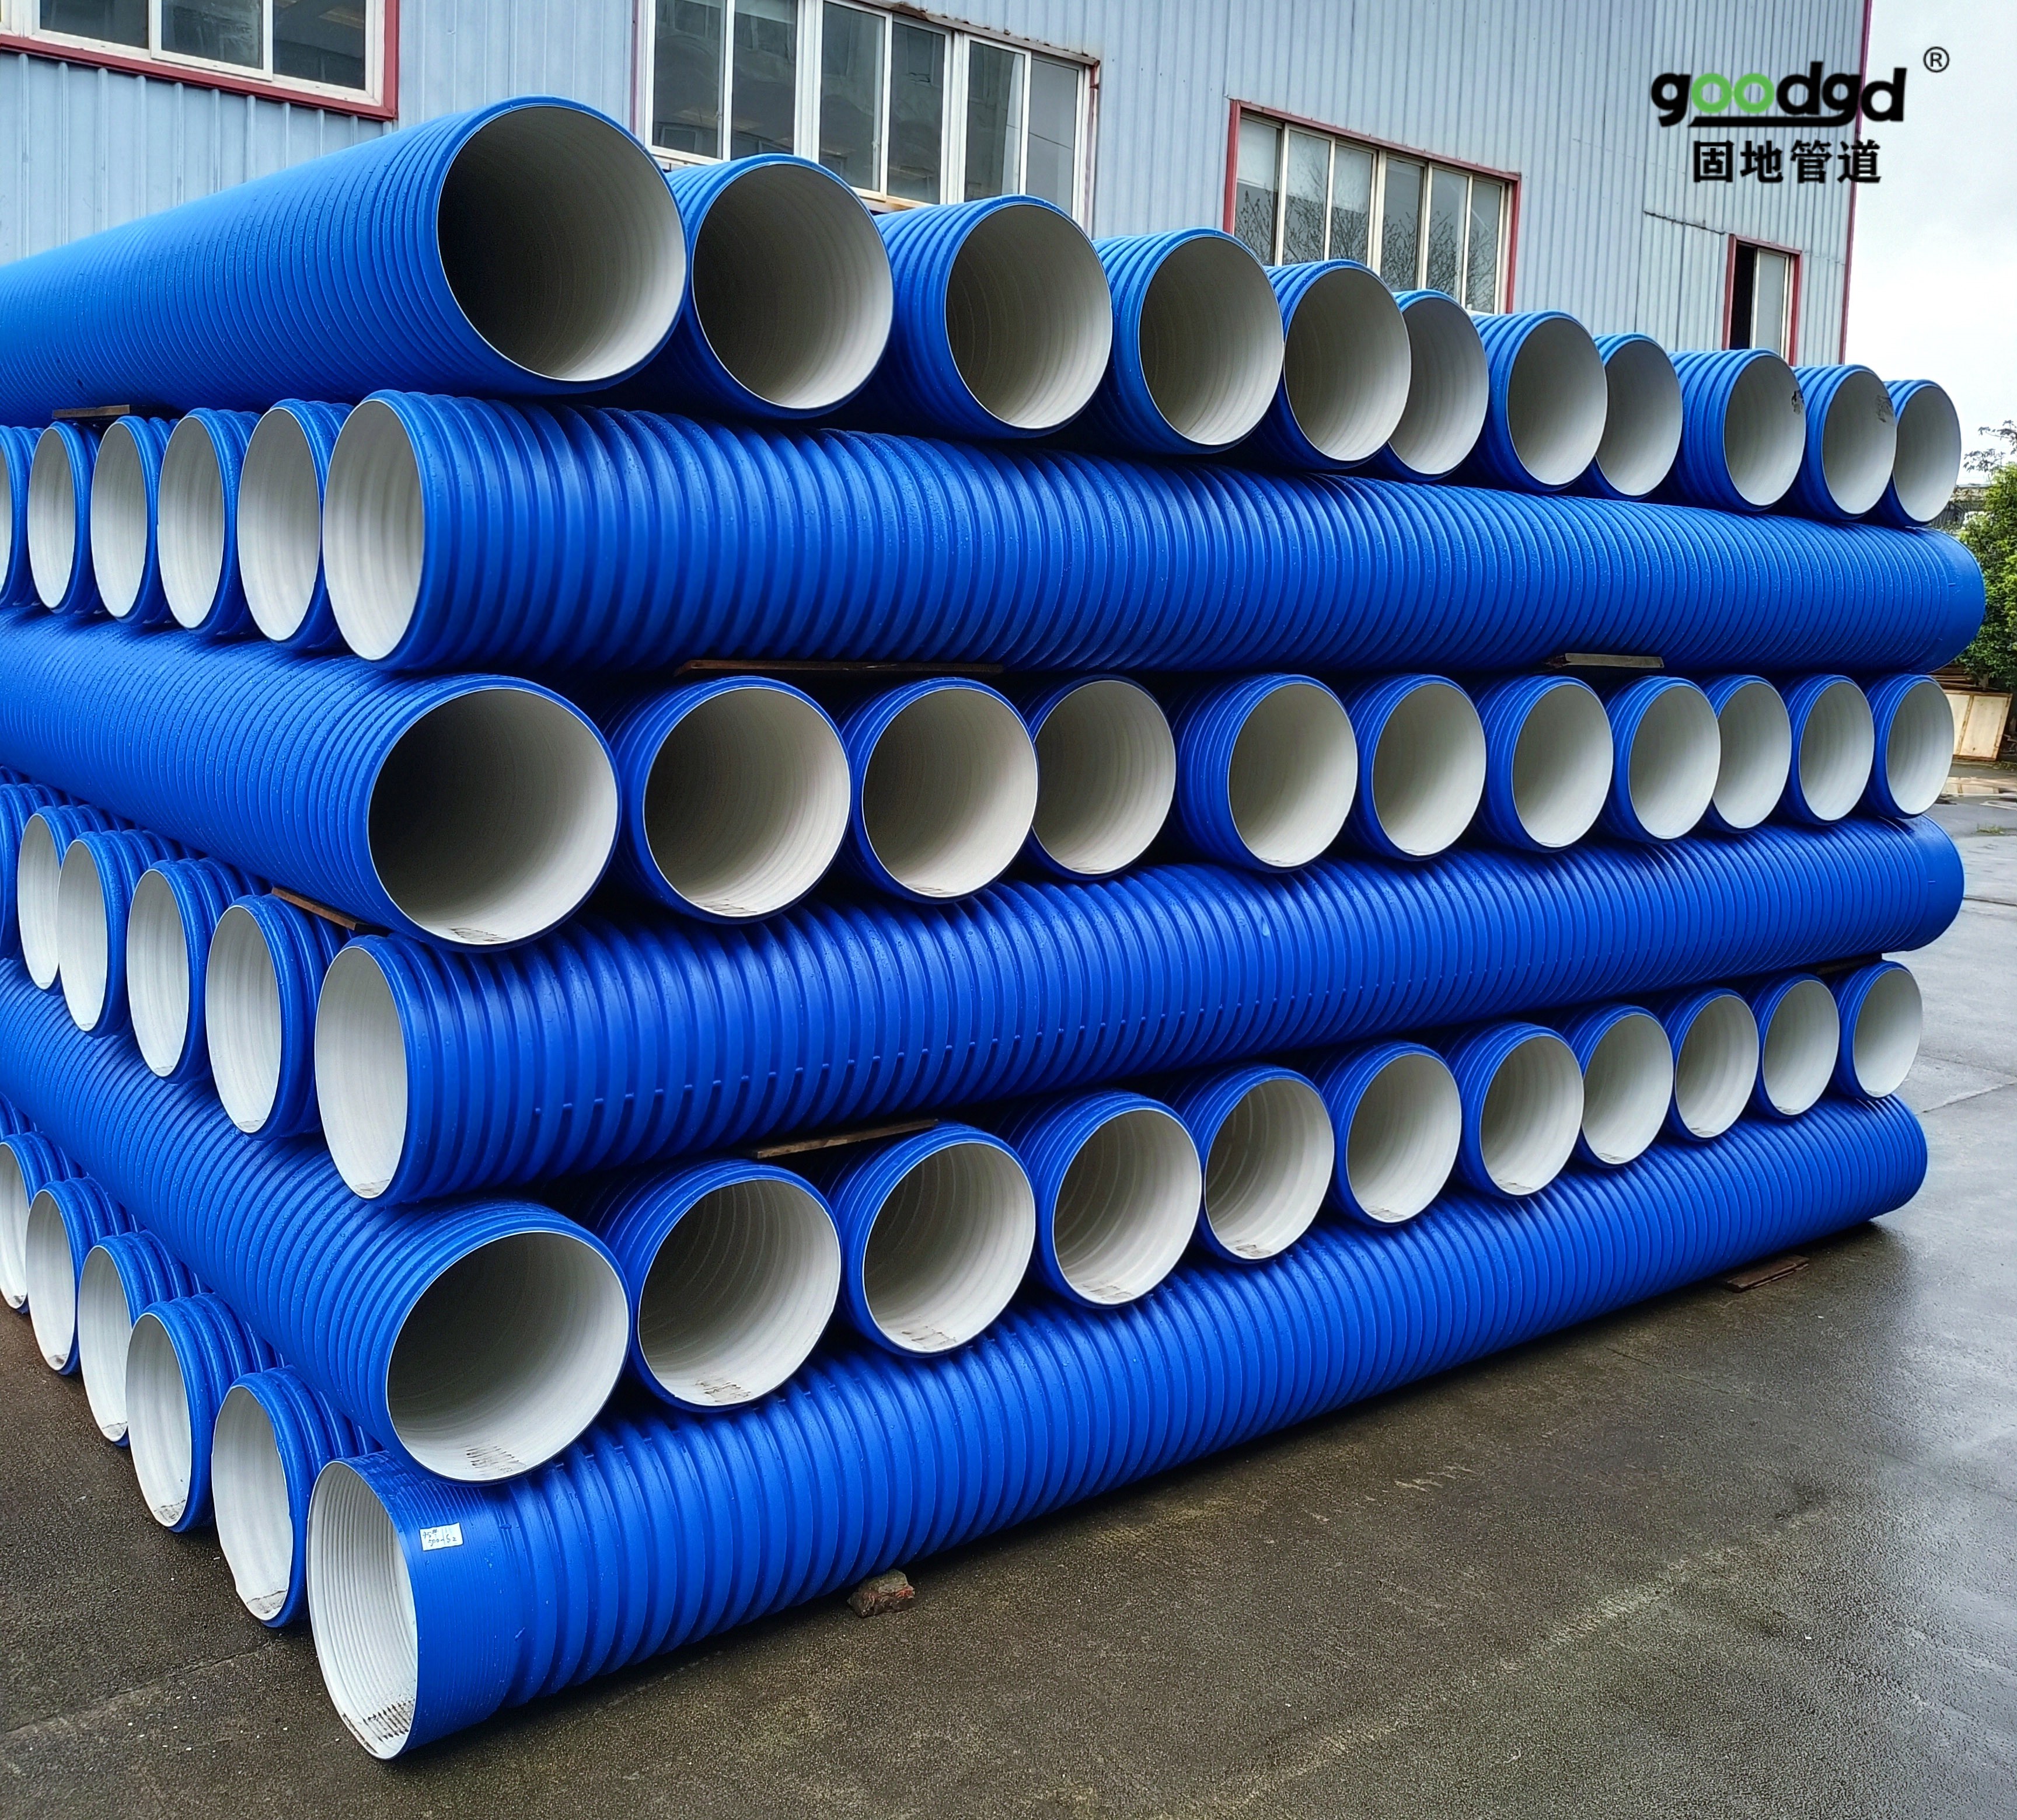 HDPE double wall corrugated pipe sewage pipe supplied by solid pipeline manufacturer, national standard level 8